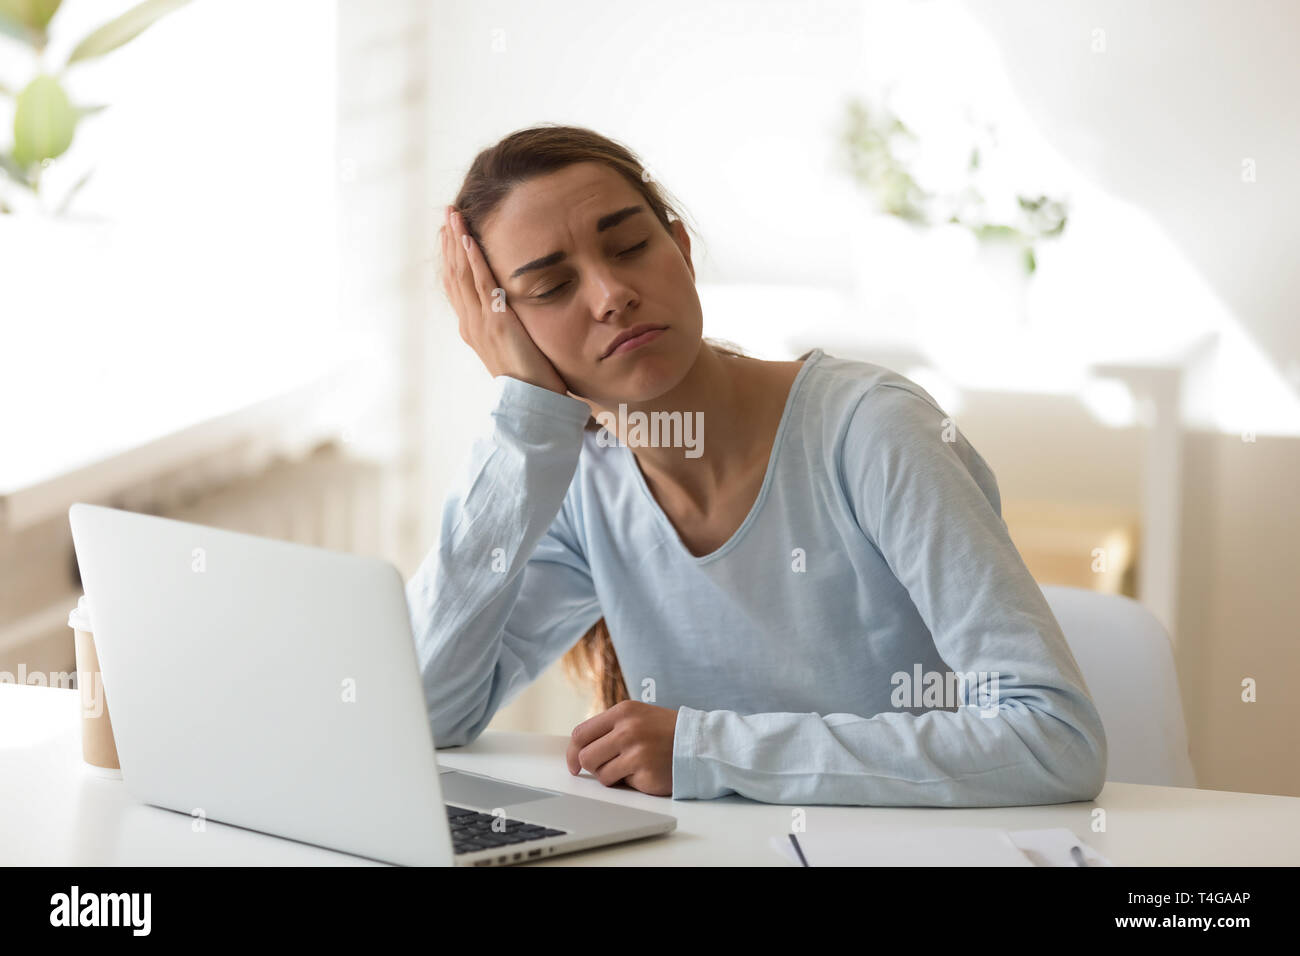 Tired woman sleeping at desktop in front of computer Stock Photo